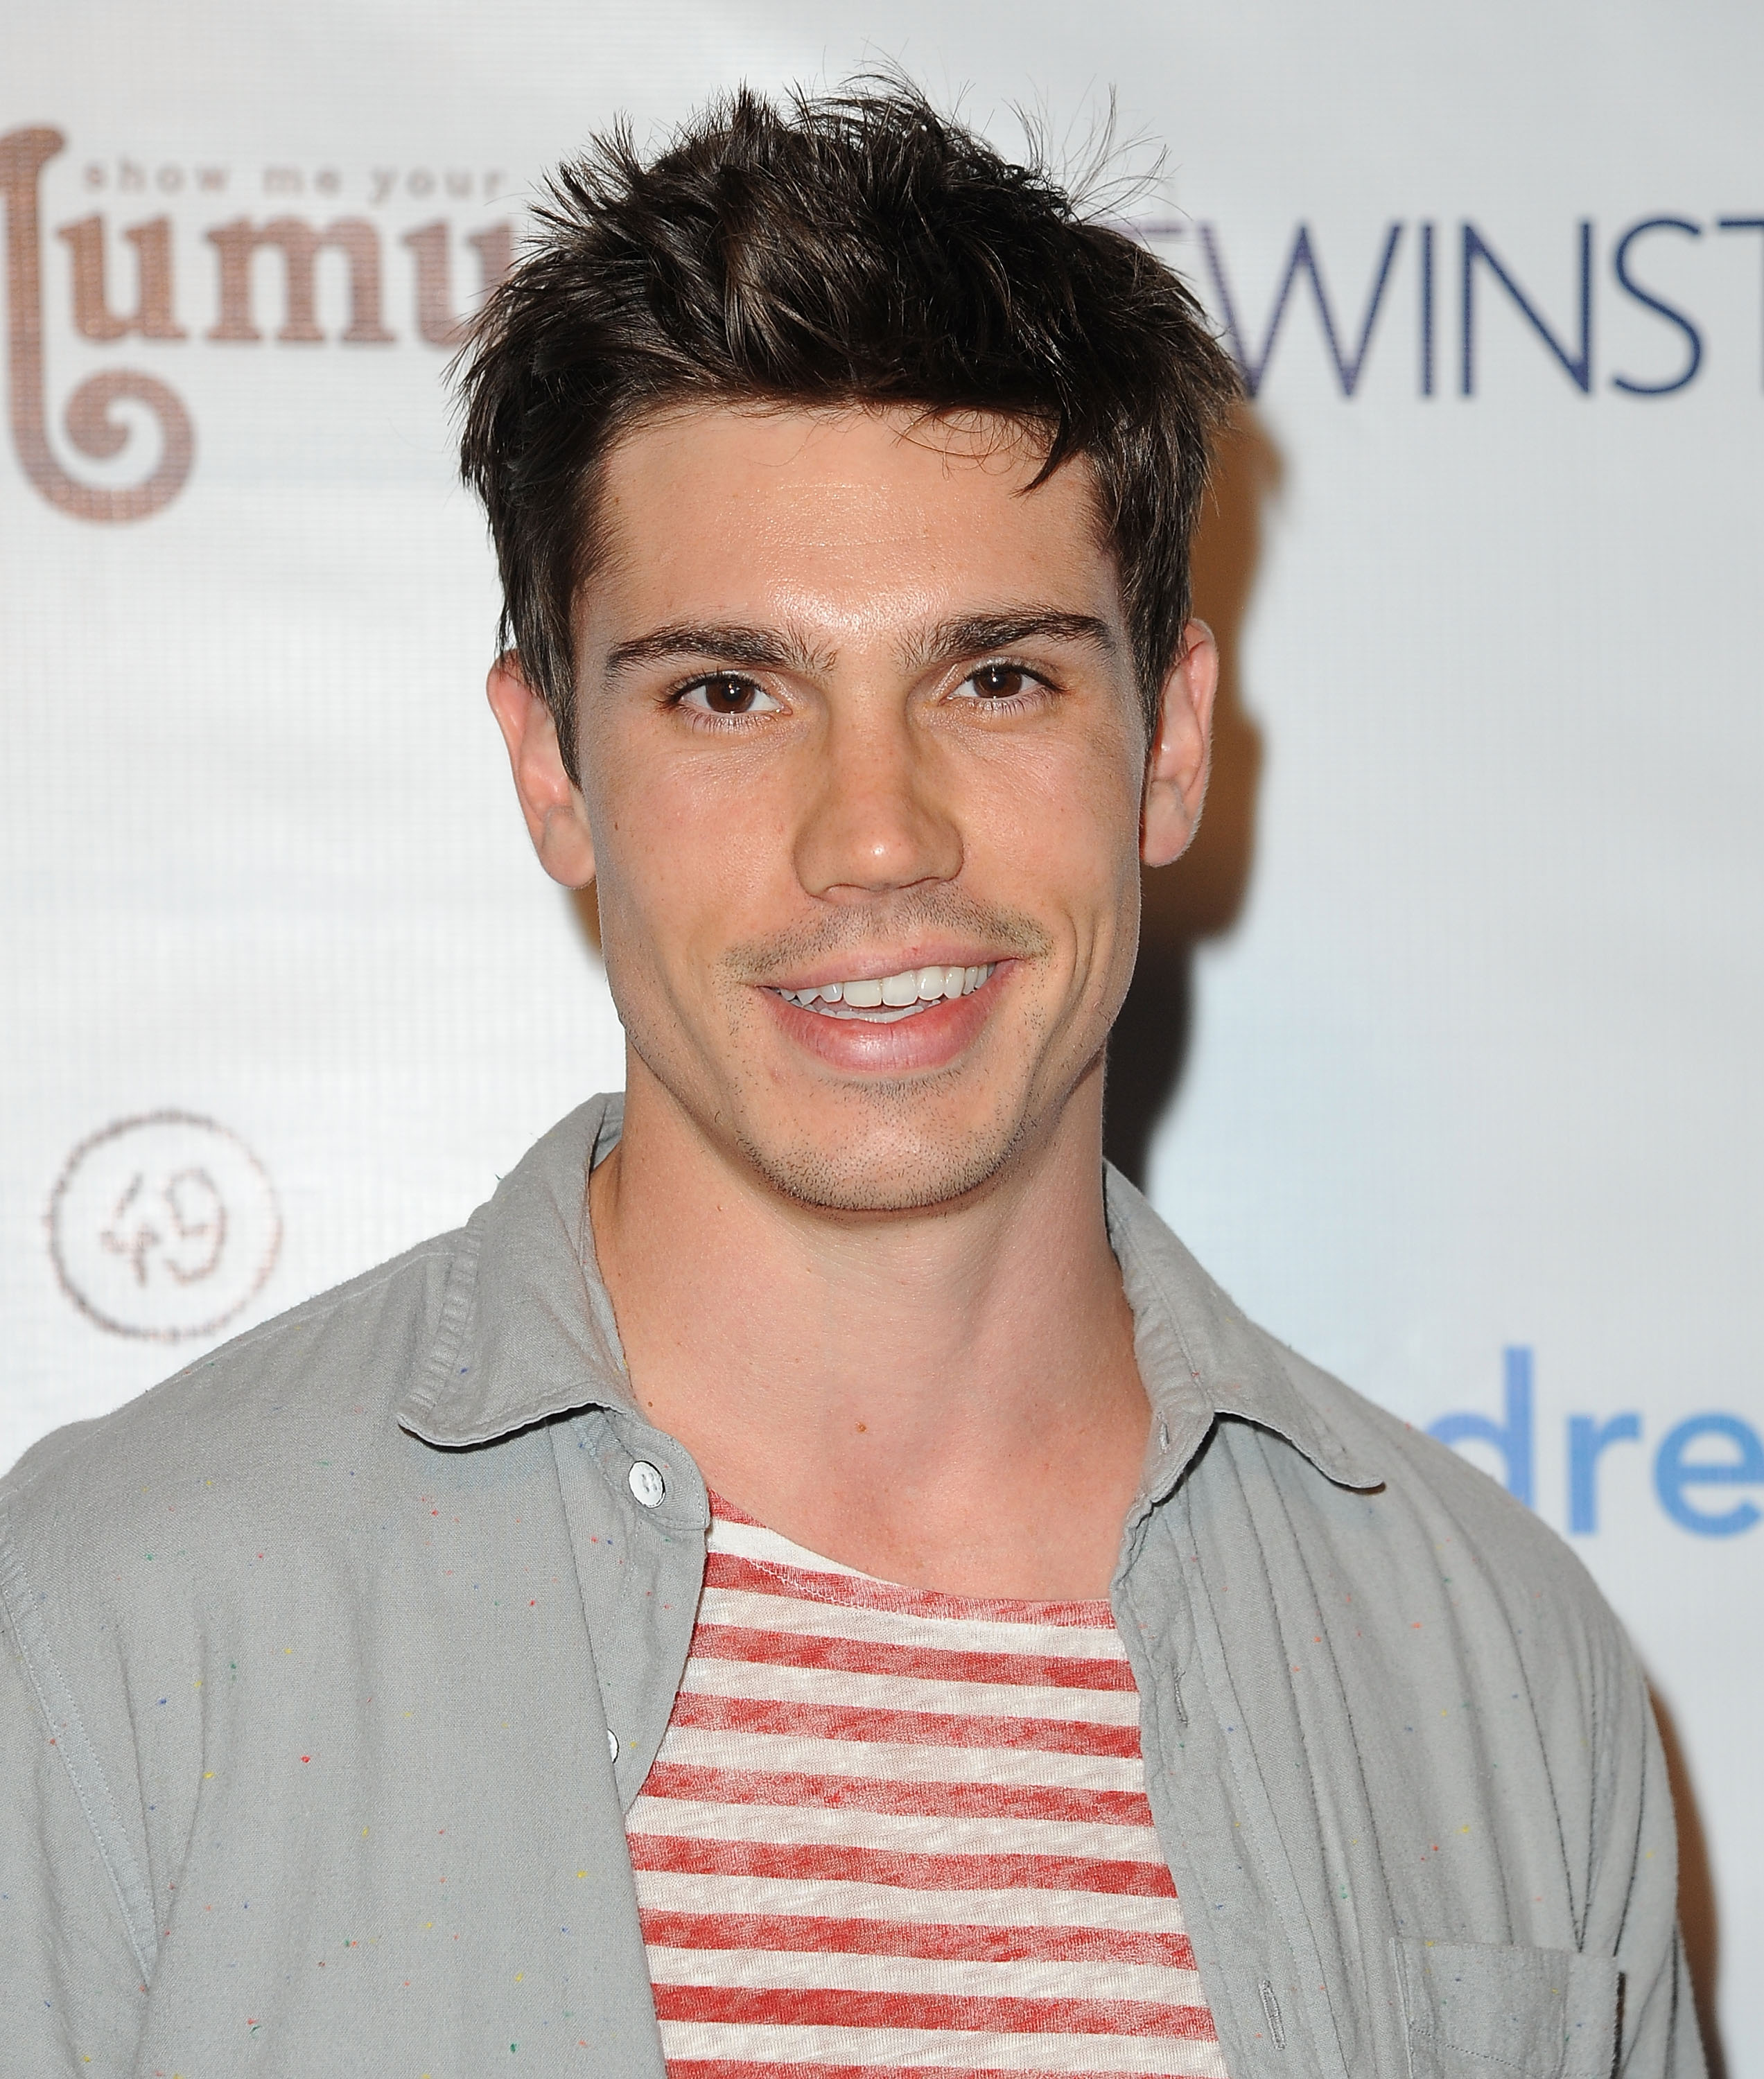 'The Bold and the Beautiful' actor Tanner Novlan wearing a red and white striped shirt, and a grey jacket.